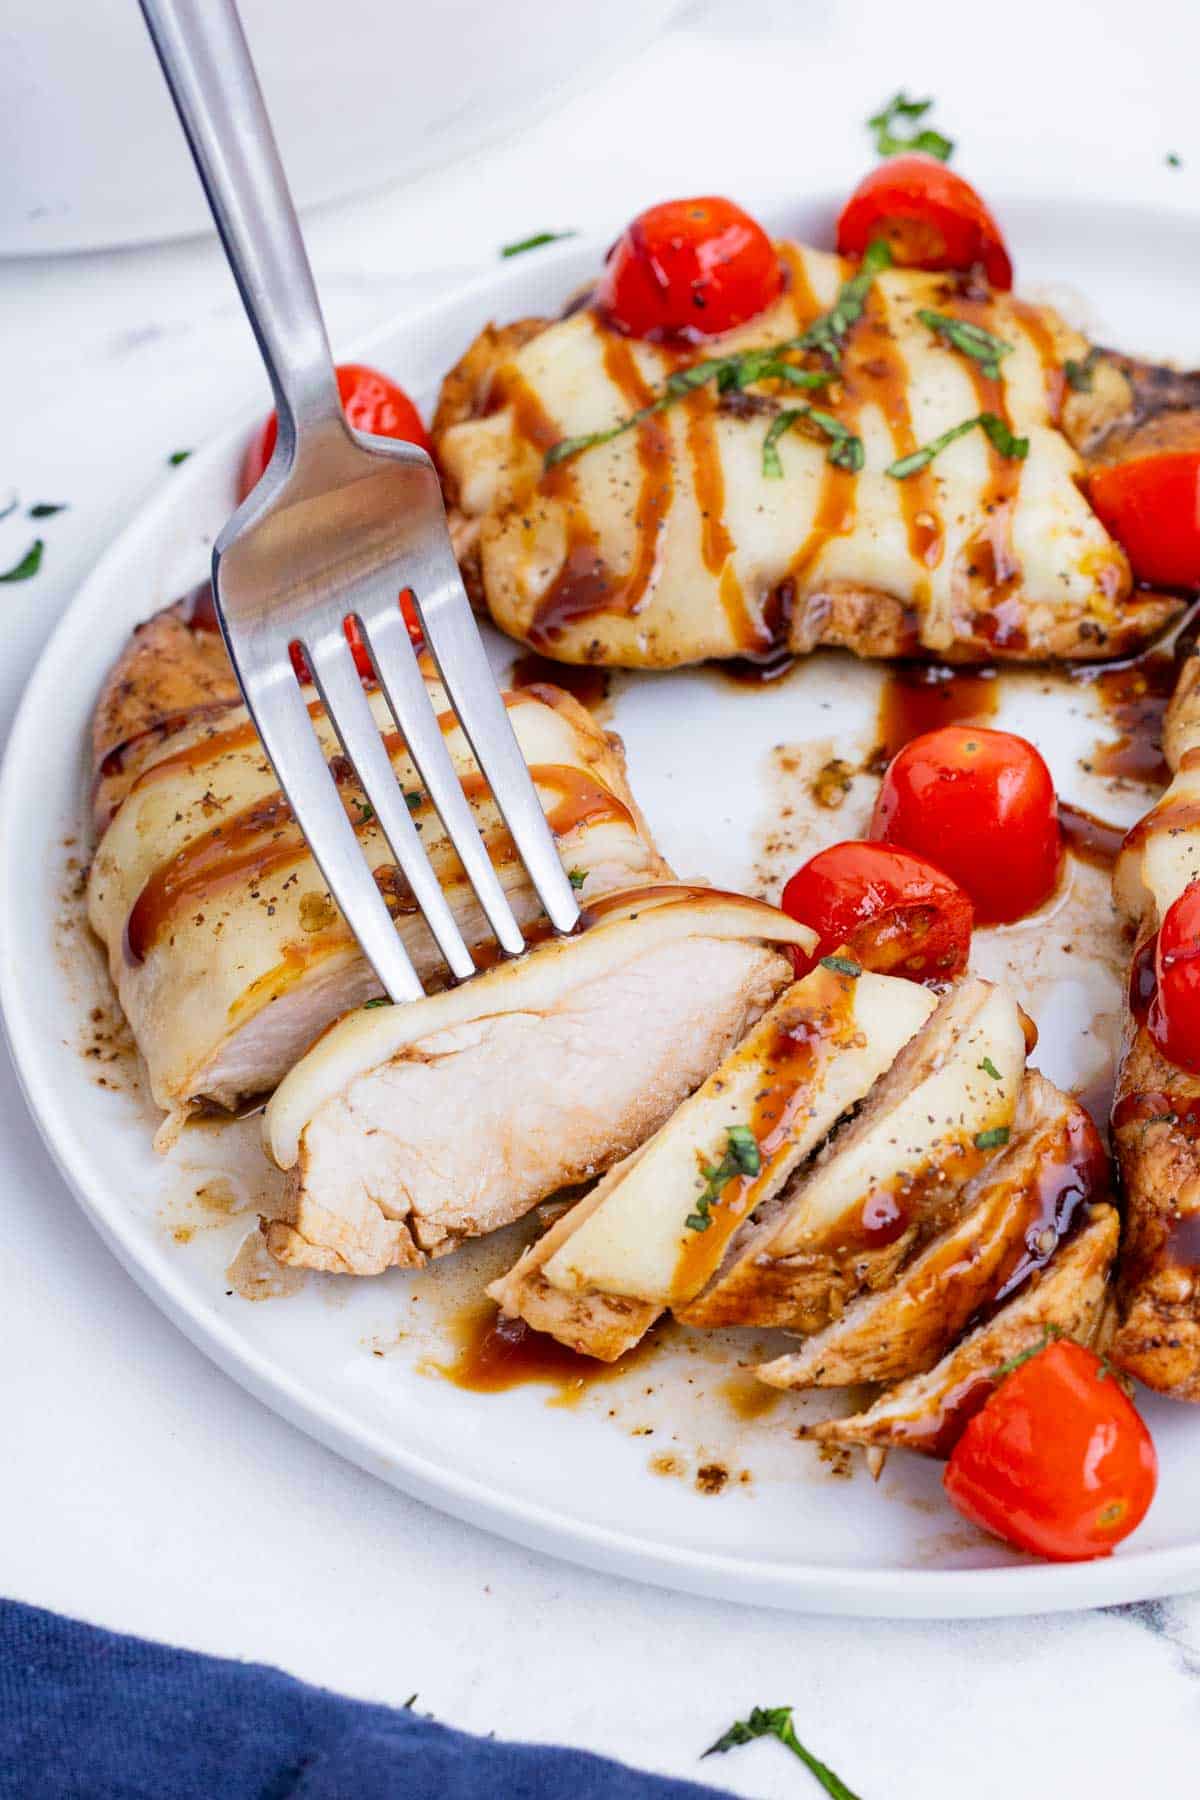 Caprese chicken is a healthy Italian recipe that is ready in under 30 minutes.